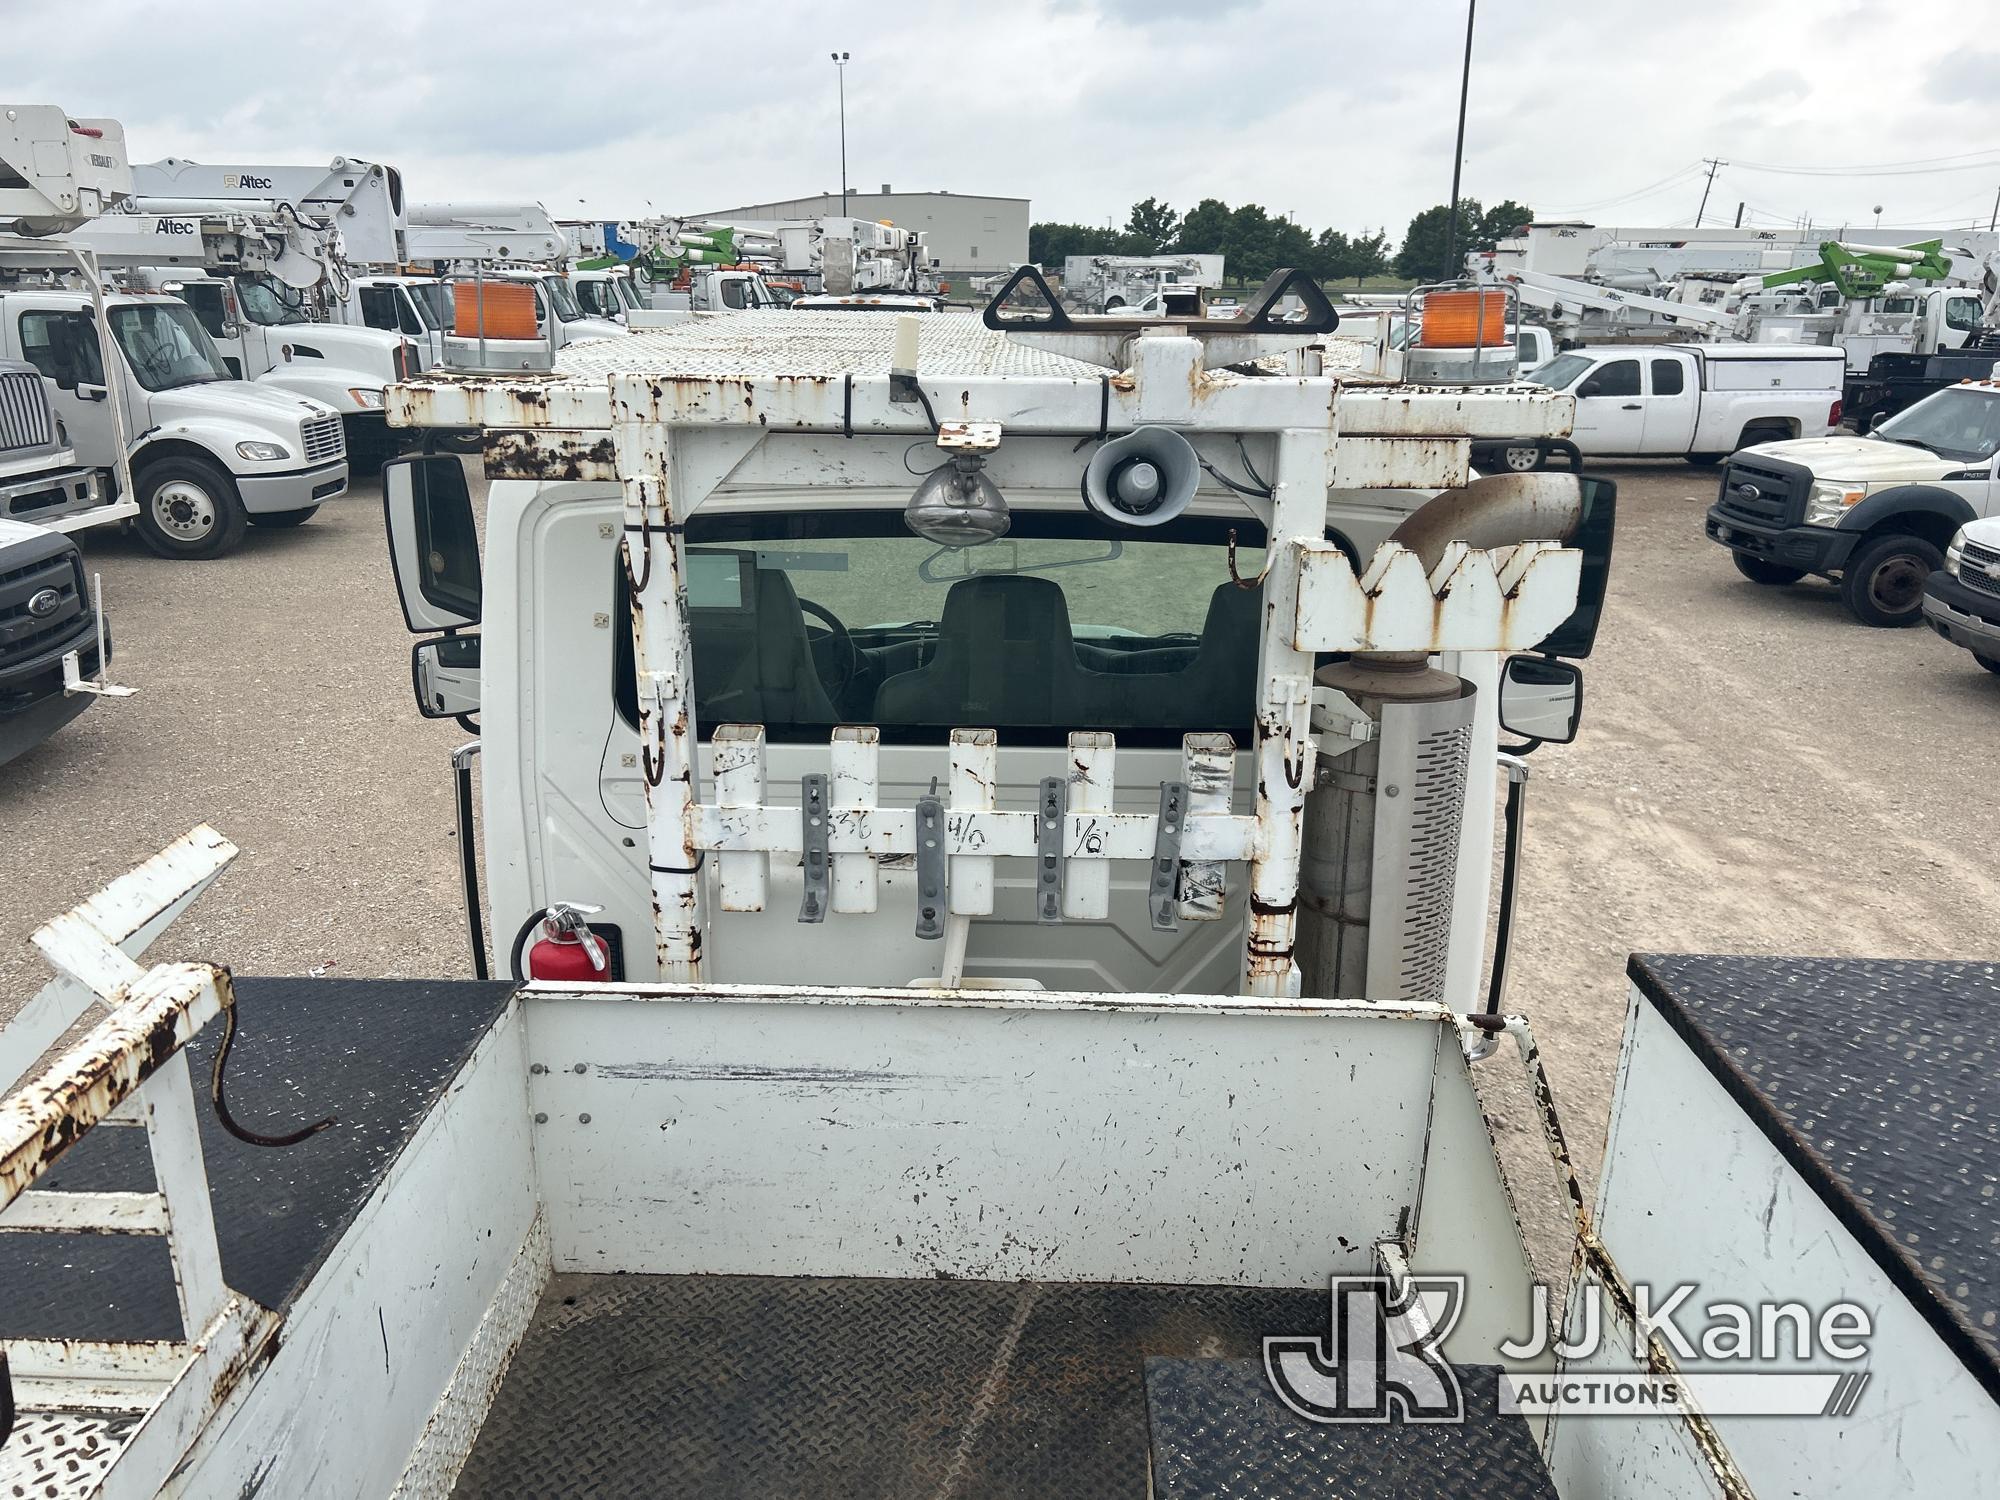 (Waxahachie, TX) 2005 International 4400 Utility Truck Runs & Moves, Upper Removed, Hydraulic Lines